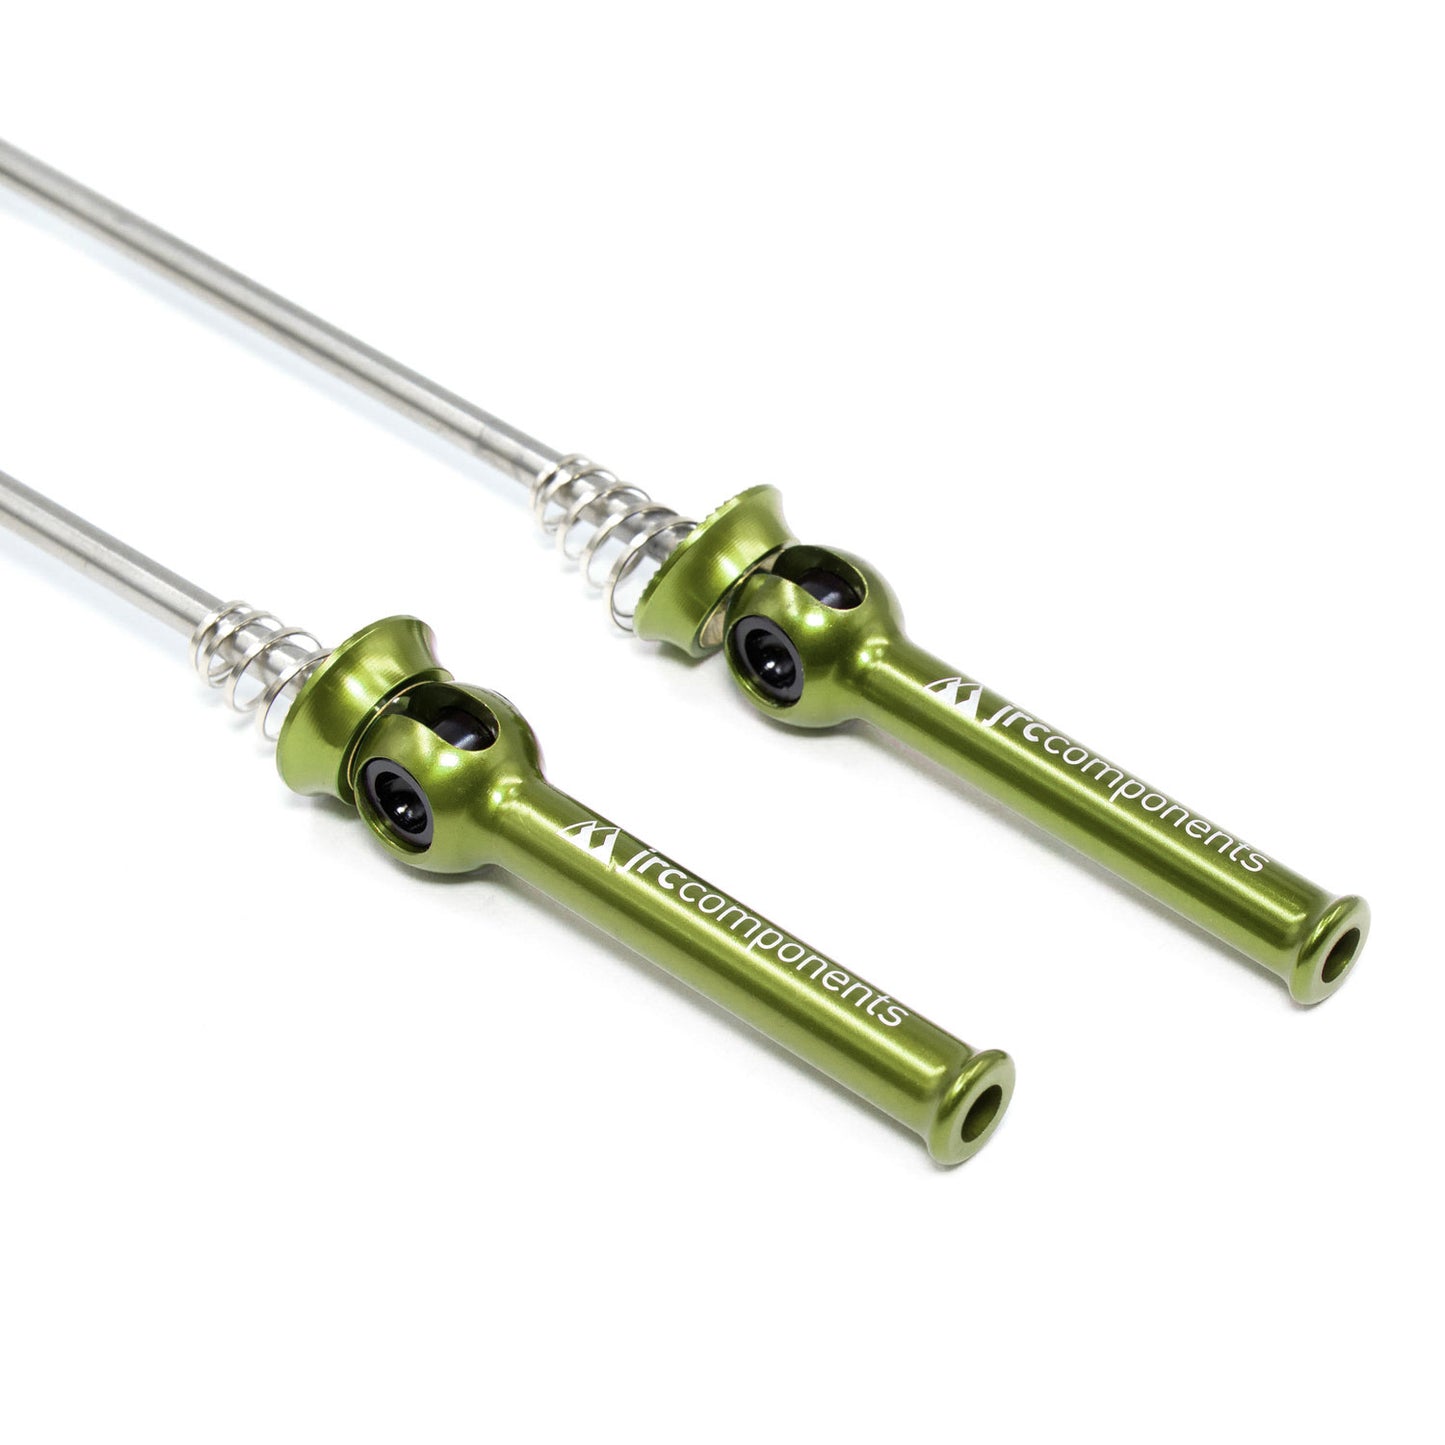 JRC Lightweight Bicycle Components Quick Release Skewers With Titanium Axel And Oversized Hollowed Anodised Levers Set In Acid Green